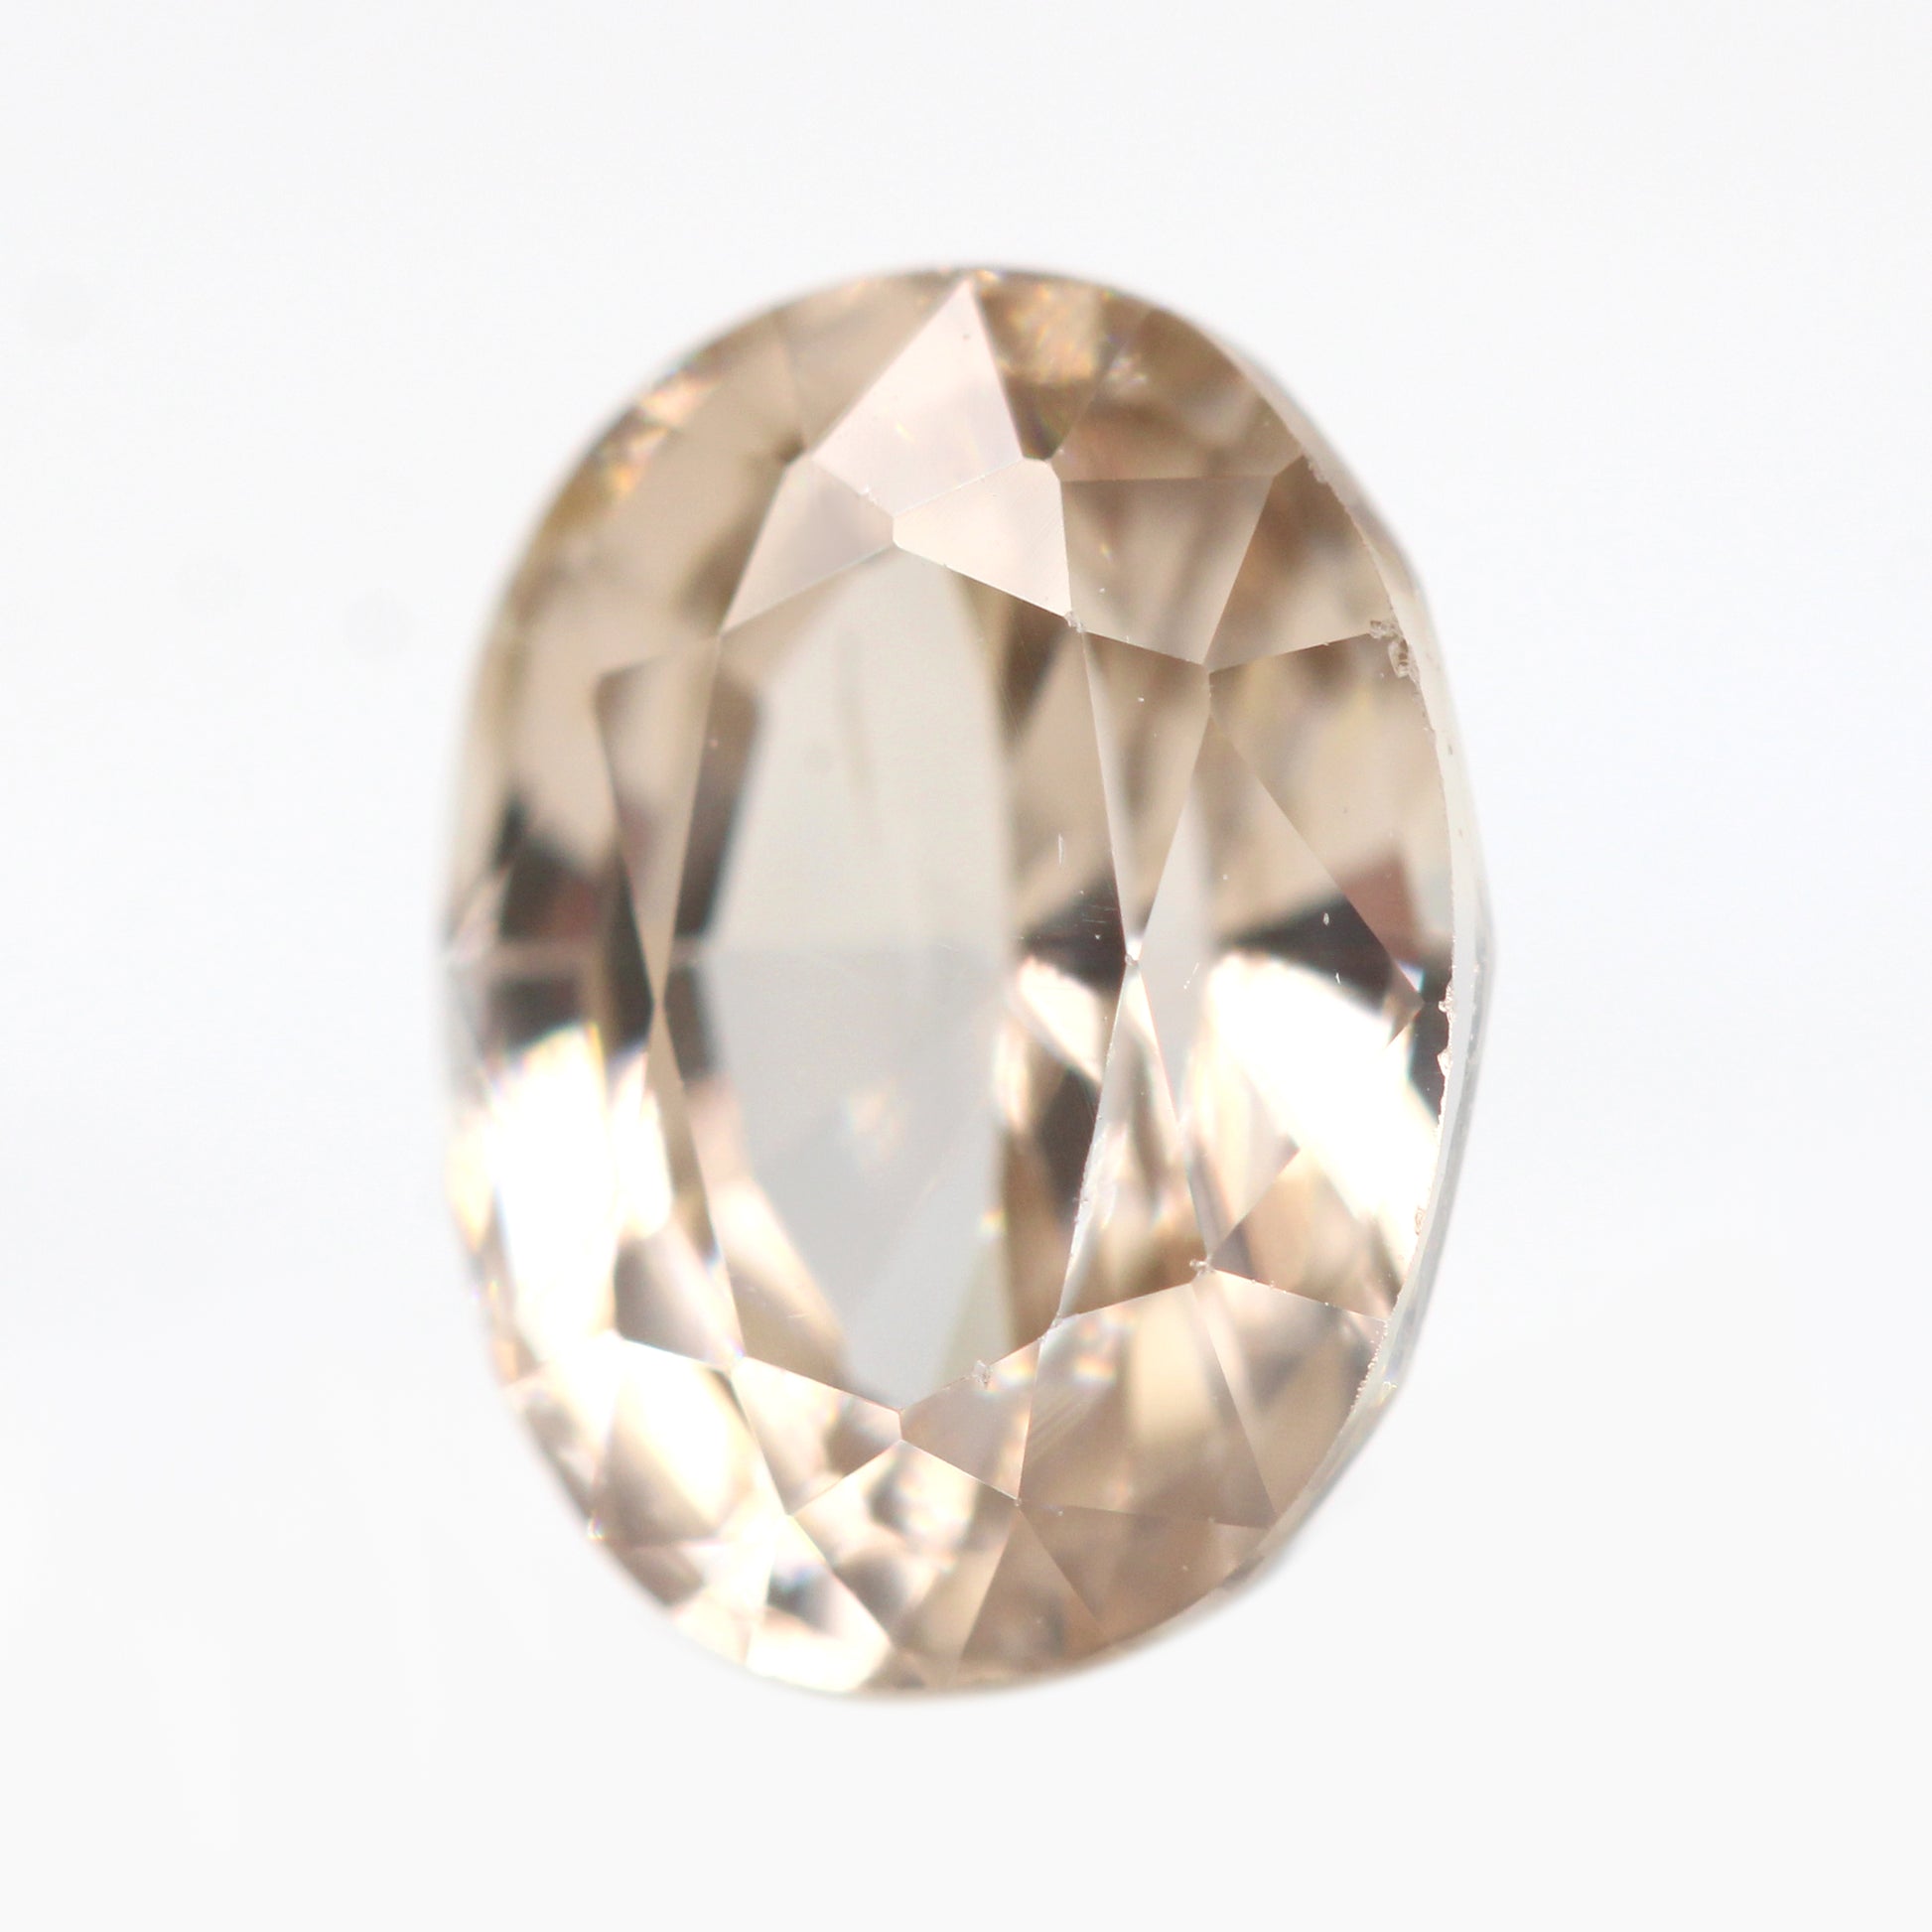 3.05 Carat Golden Light Peach Champagne Oval Sapphire for Custom Work - Inventory Code COS305 - Midwinter Co. Alternative Bridal Rings and Modern Fine Jewelry